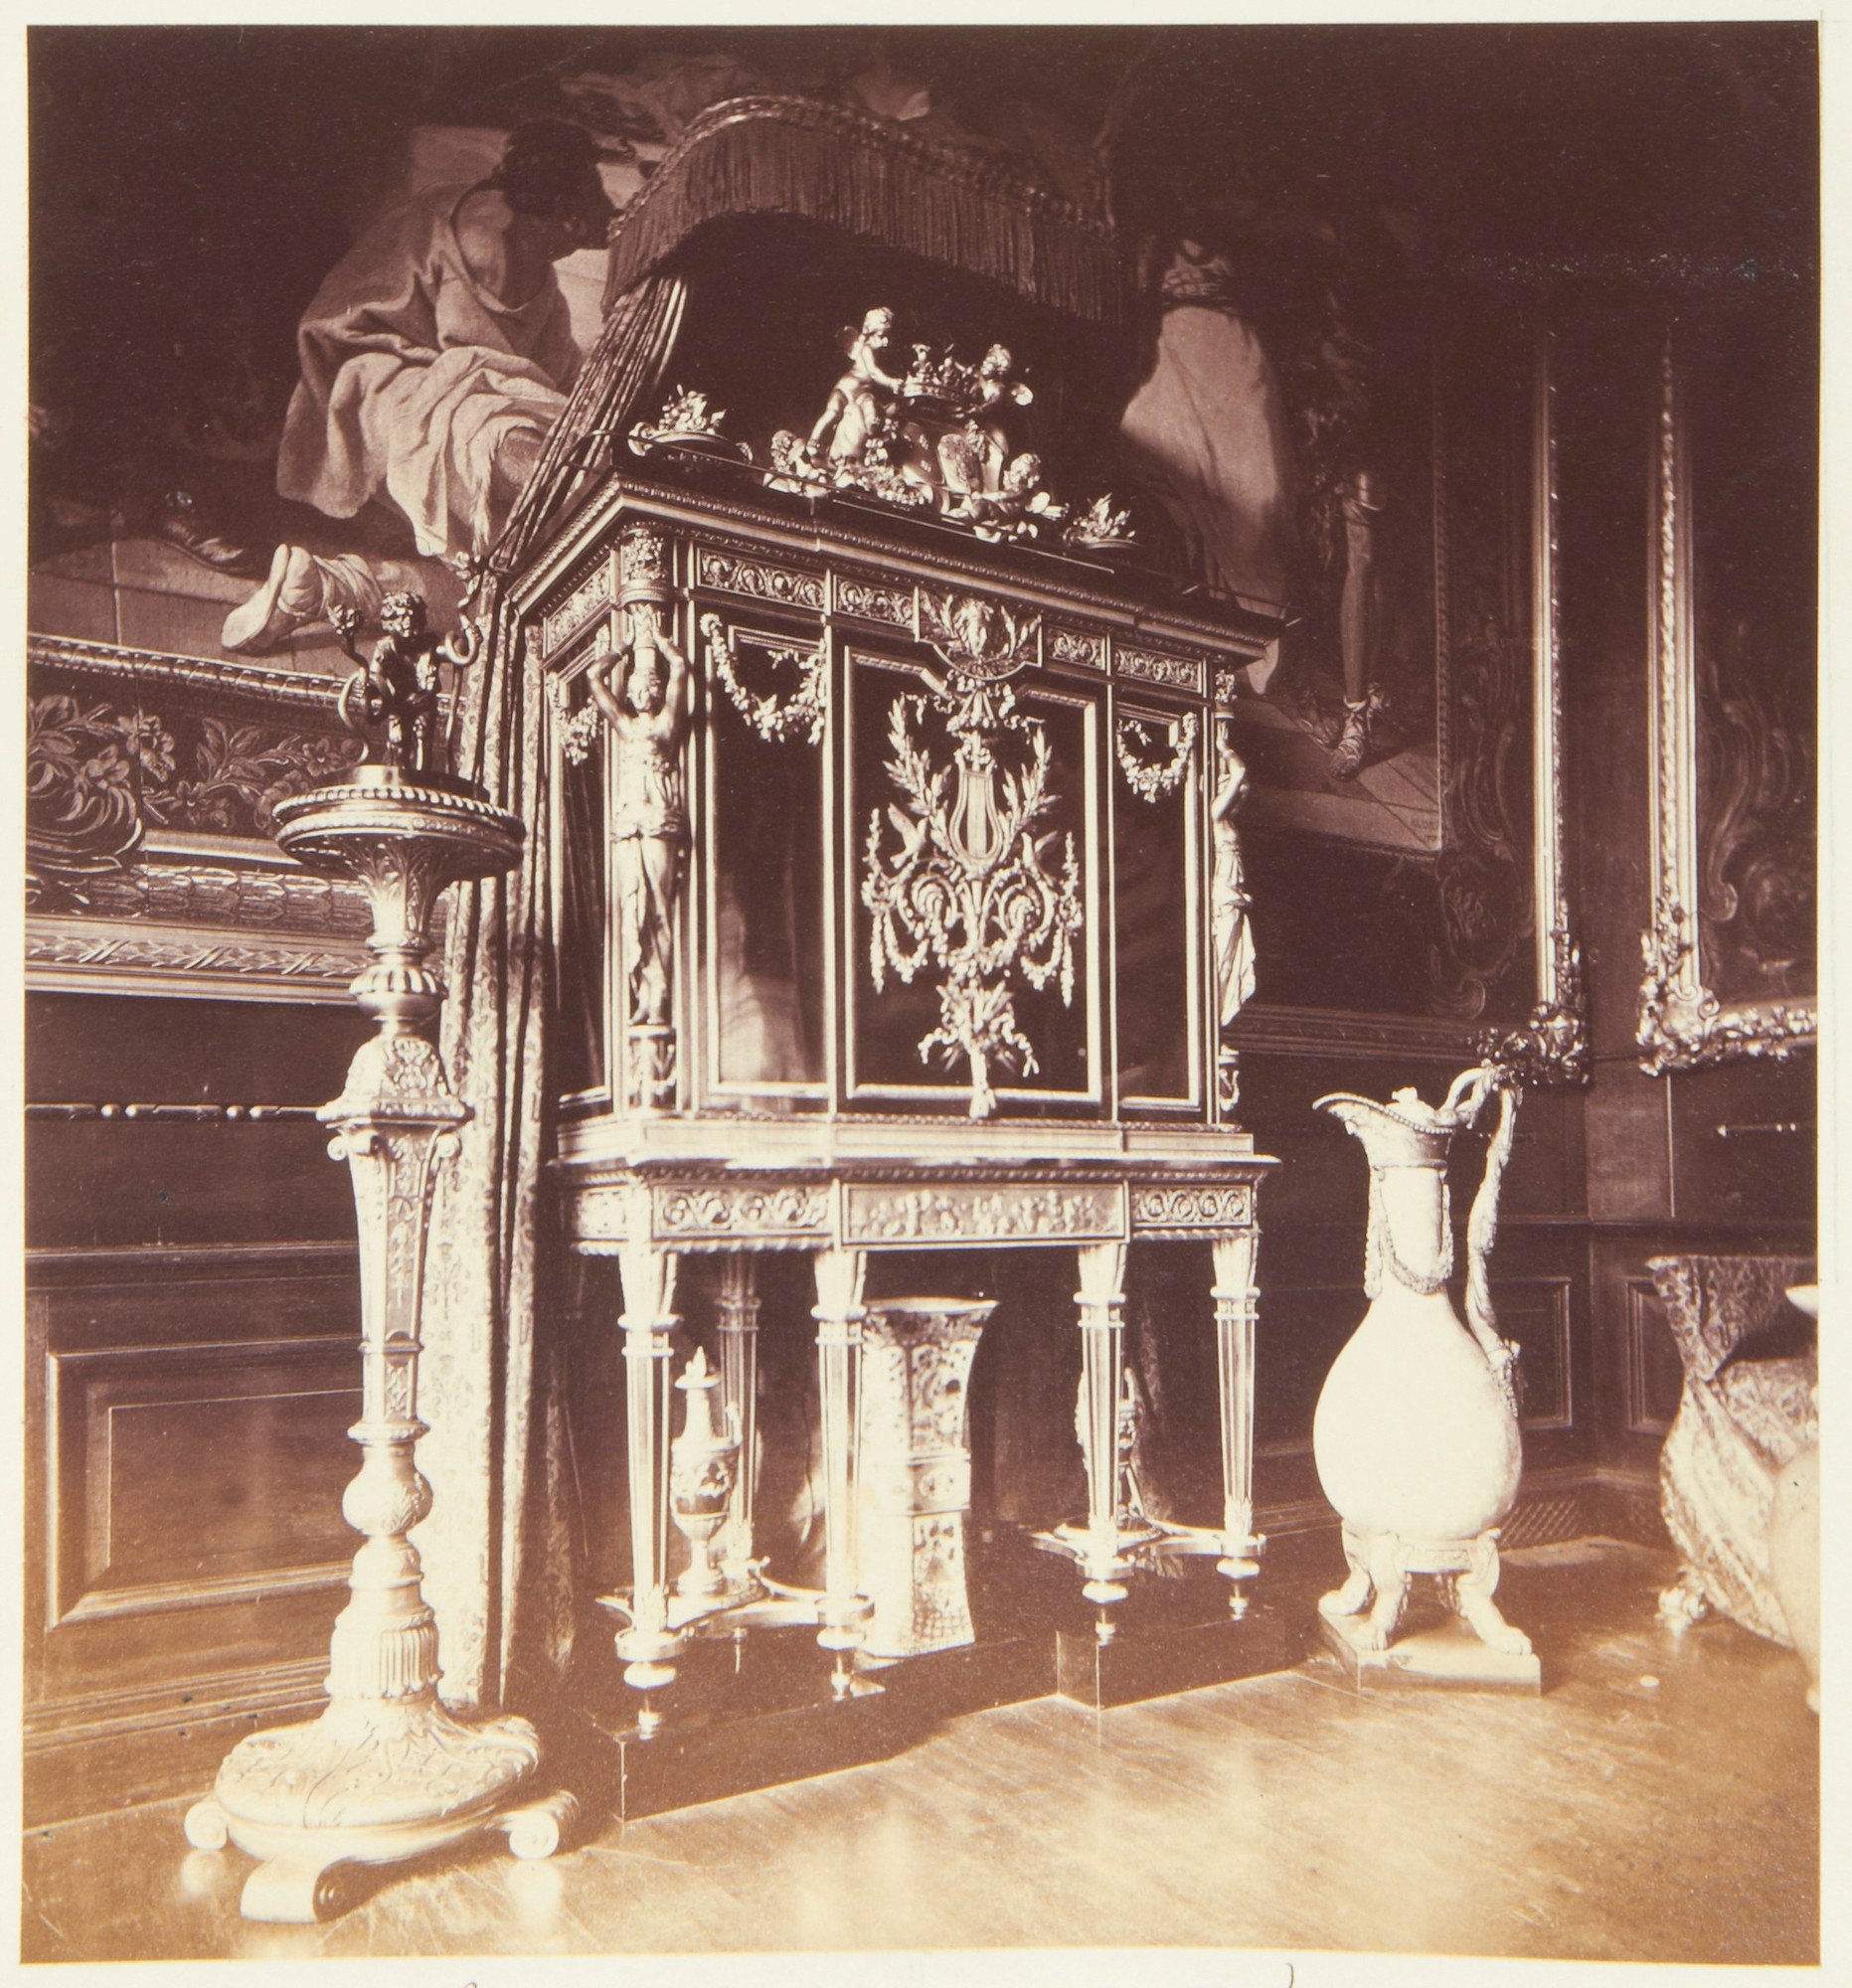 Photograph of some of the furniture in the Queen's Presence Chamber, Windsor Castle: large&nbsp;jewel cabinet by Riesener (RCIN 31207)&nbsp;with canopy above, a large chinese porcelain jar on floor and candle stand&nbsp;(RCIN 33389)&nbsp;with figurative c